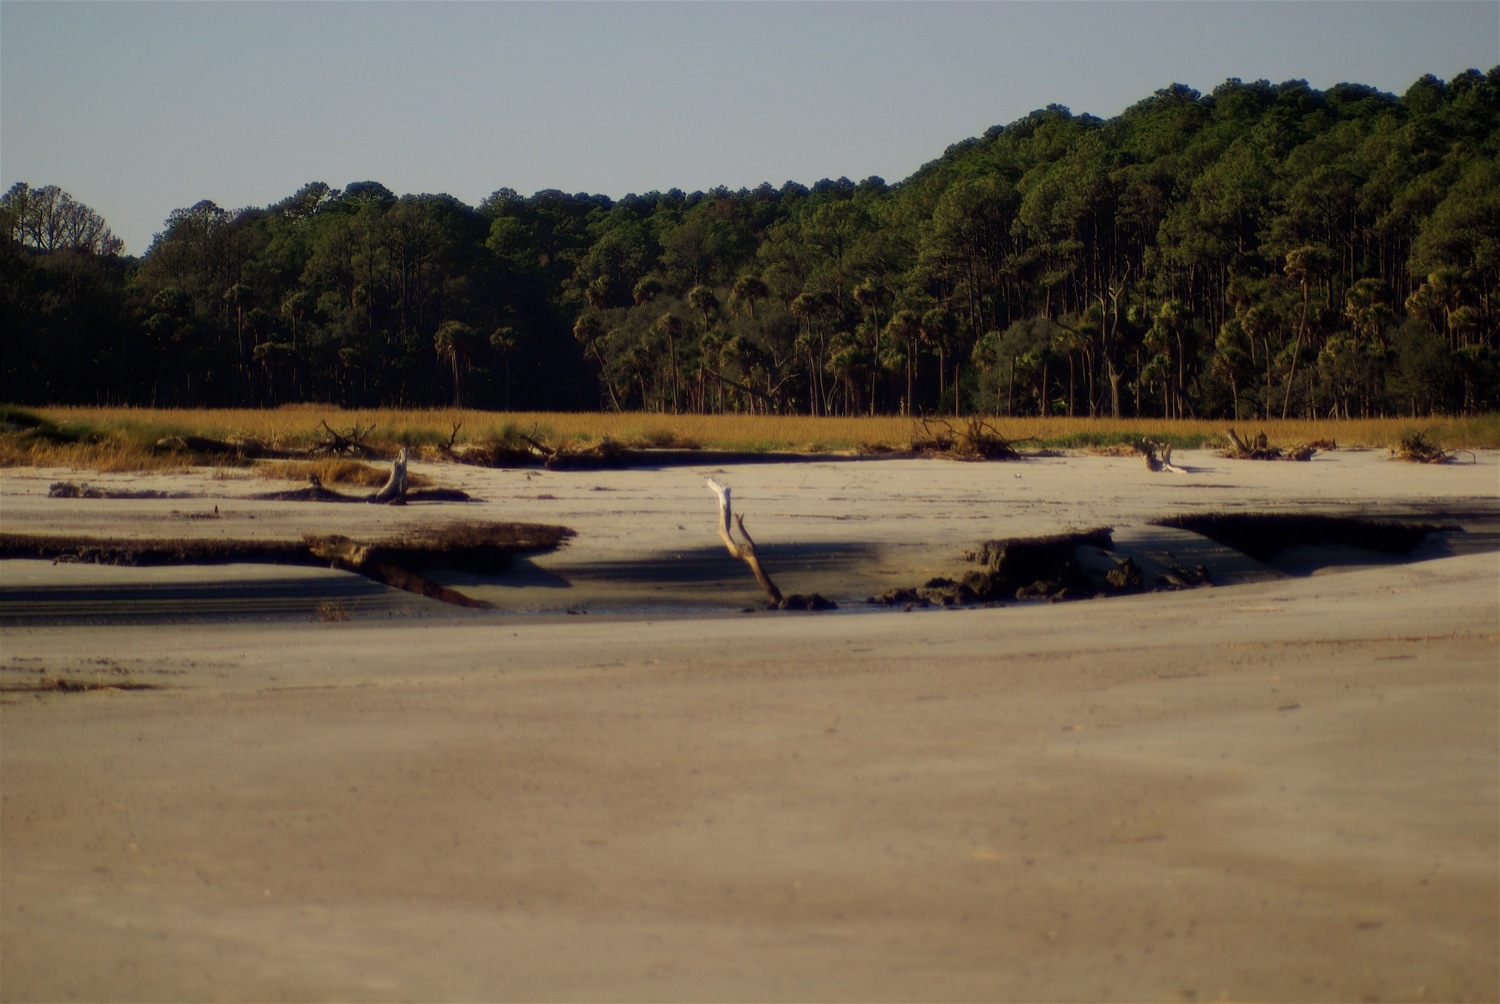 an image of an empty beach area with trees